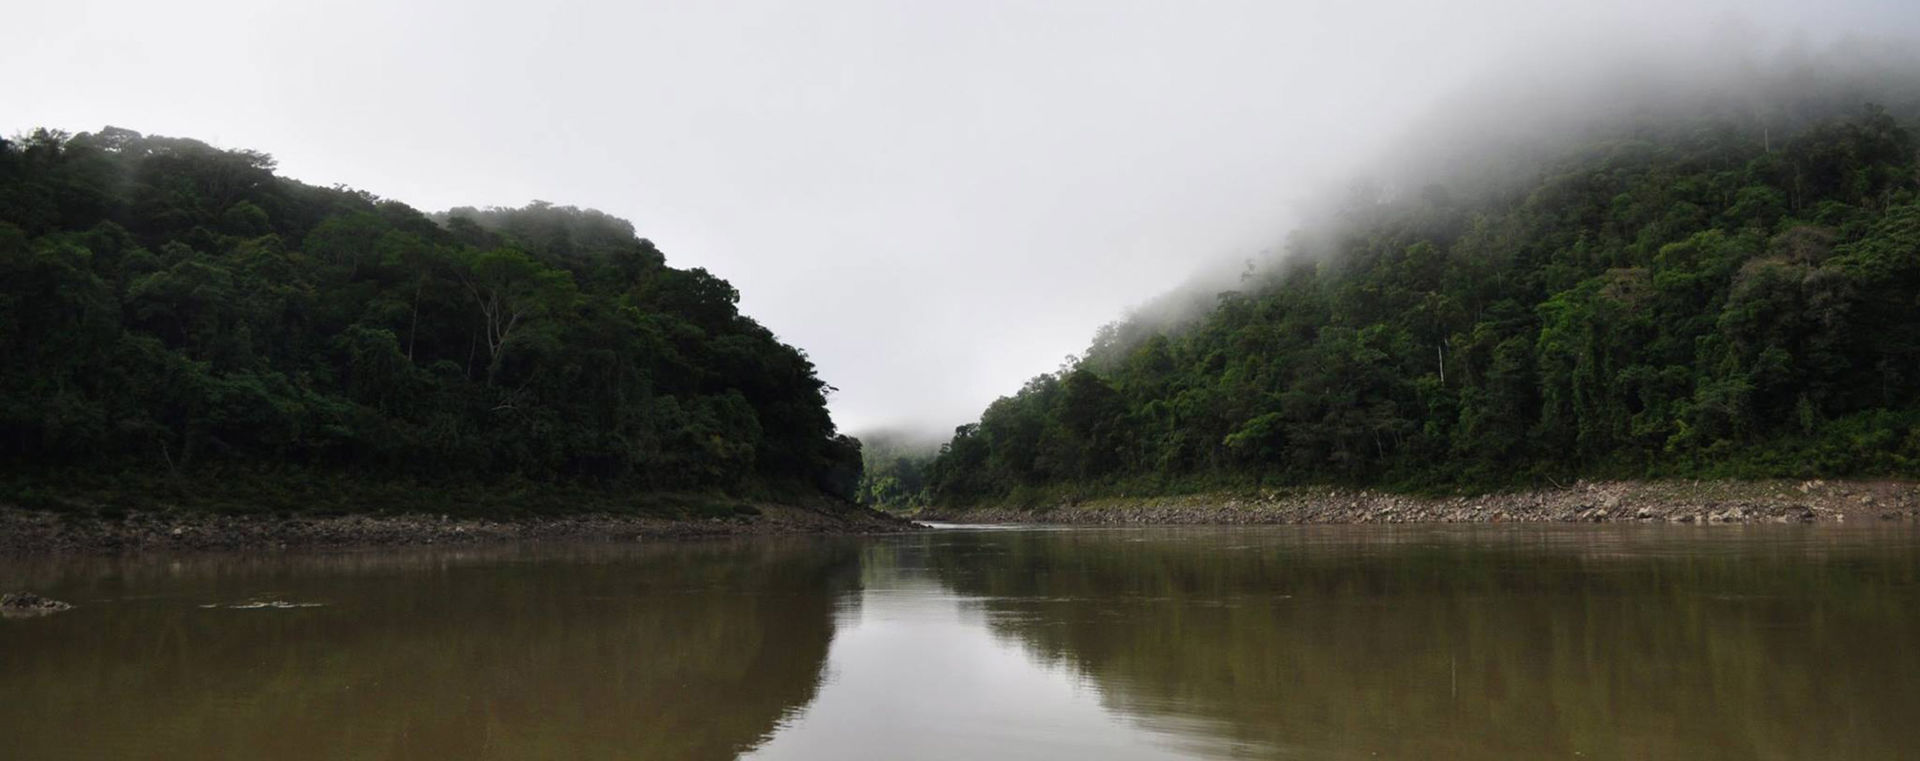 Smooth river between two green hills in the fog